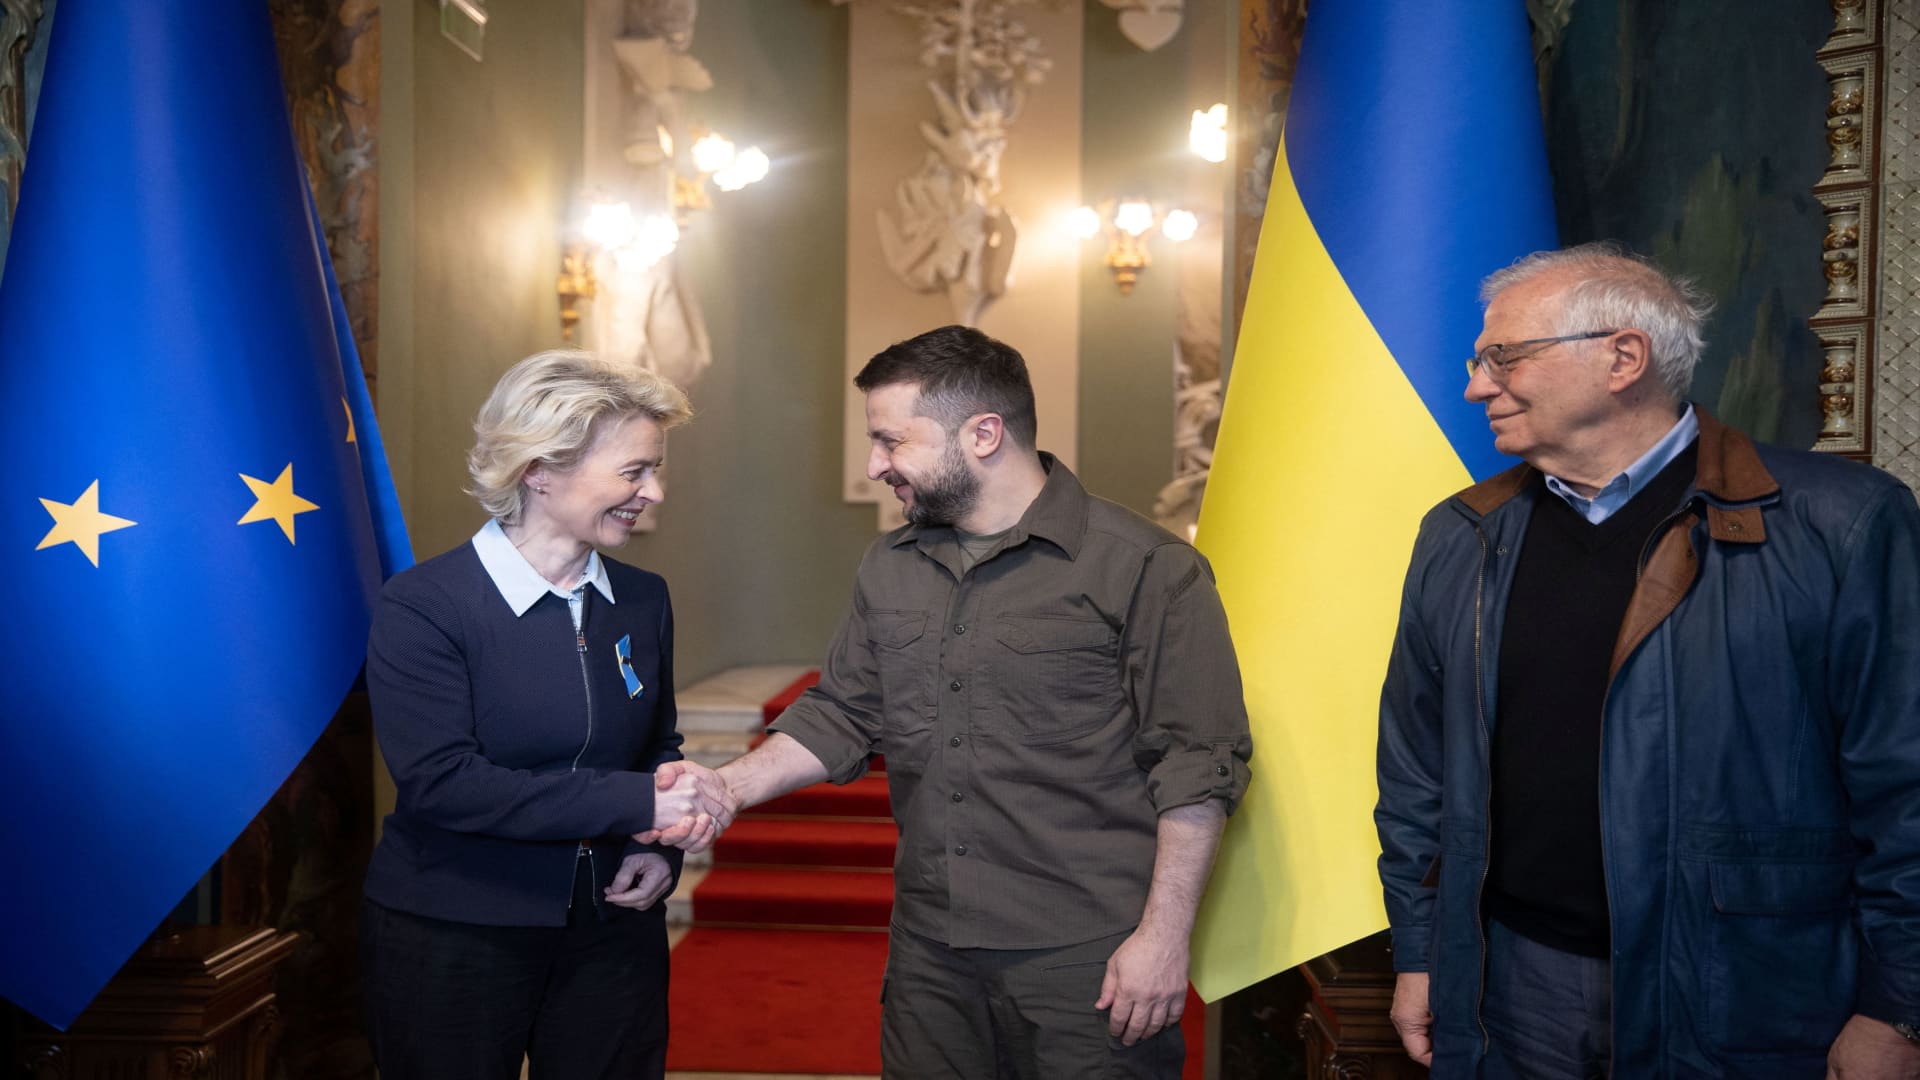 Ukraine's President Volodymyr Zelenskiy welcomes European Commission President Ursula von der Leyen and High Representative of the European Union for Foreign Affairs and Security Policy Josep Borrell, as Russia's attack on Ukraine continues, in Kyiv, Ukraine April 8, 2022. 